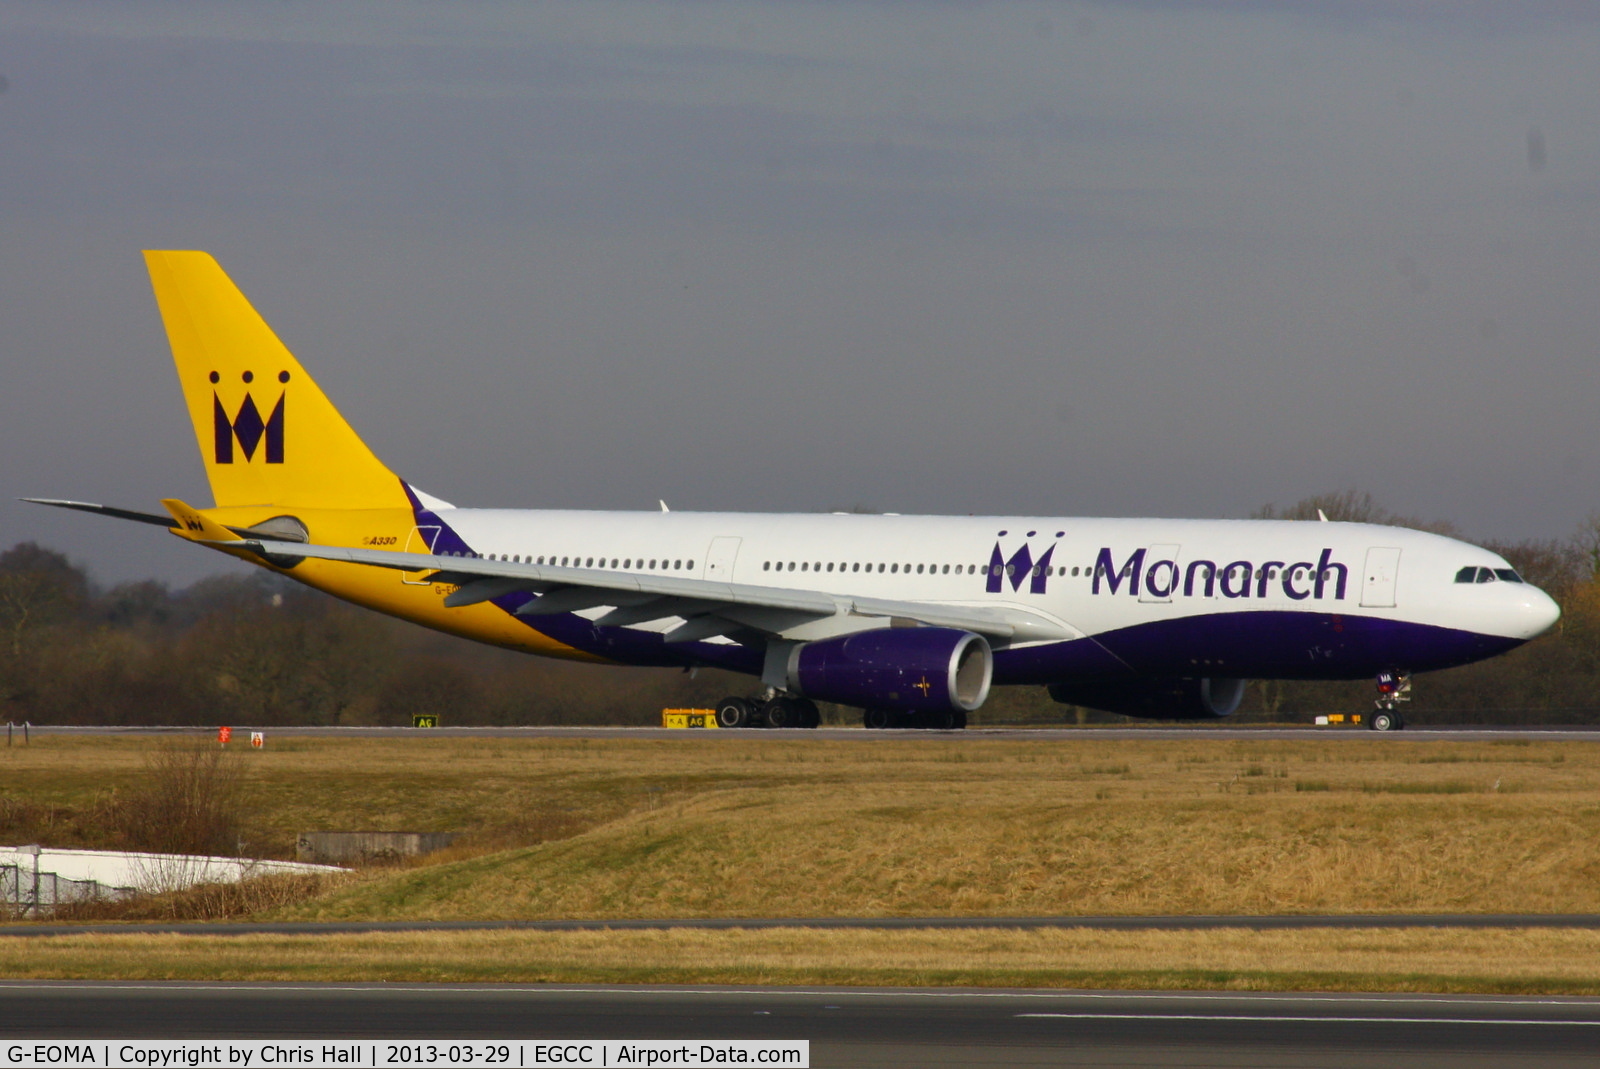 G-EOMA, 1999 Airbus A330-243 C/N 265, in Monarch's yellow tail scheme